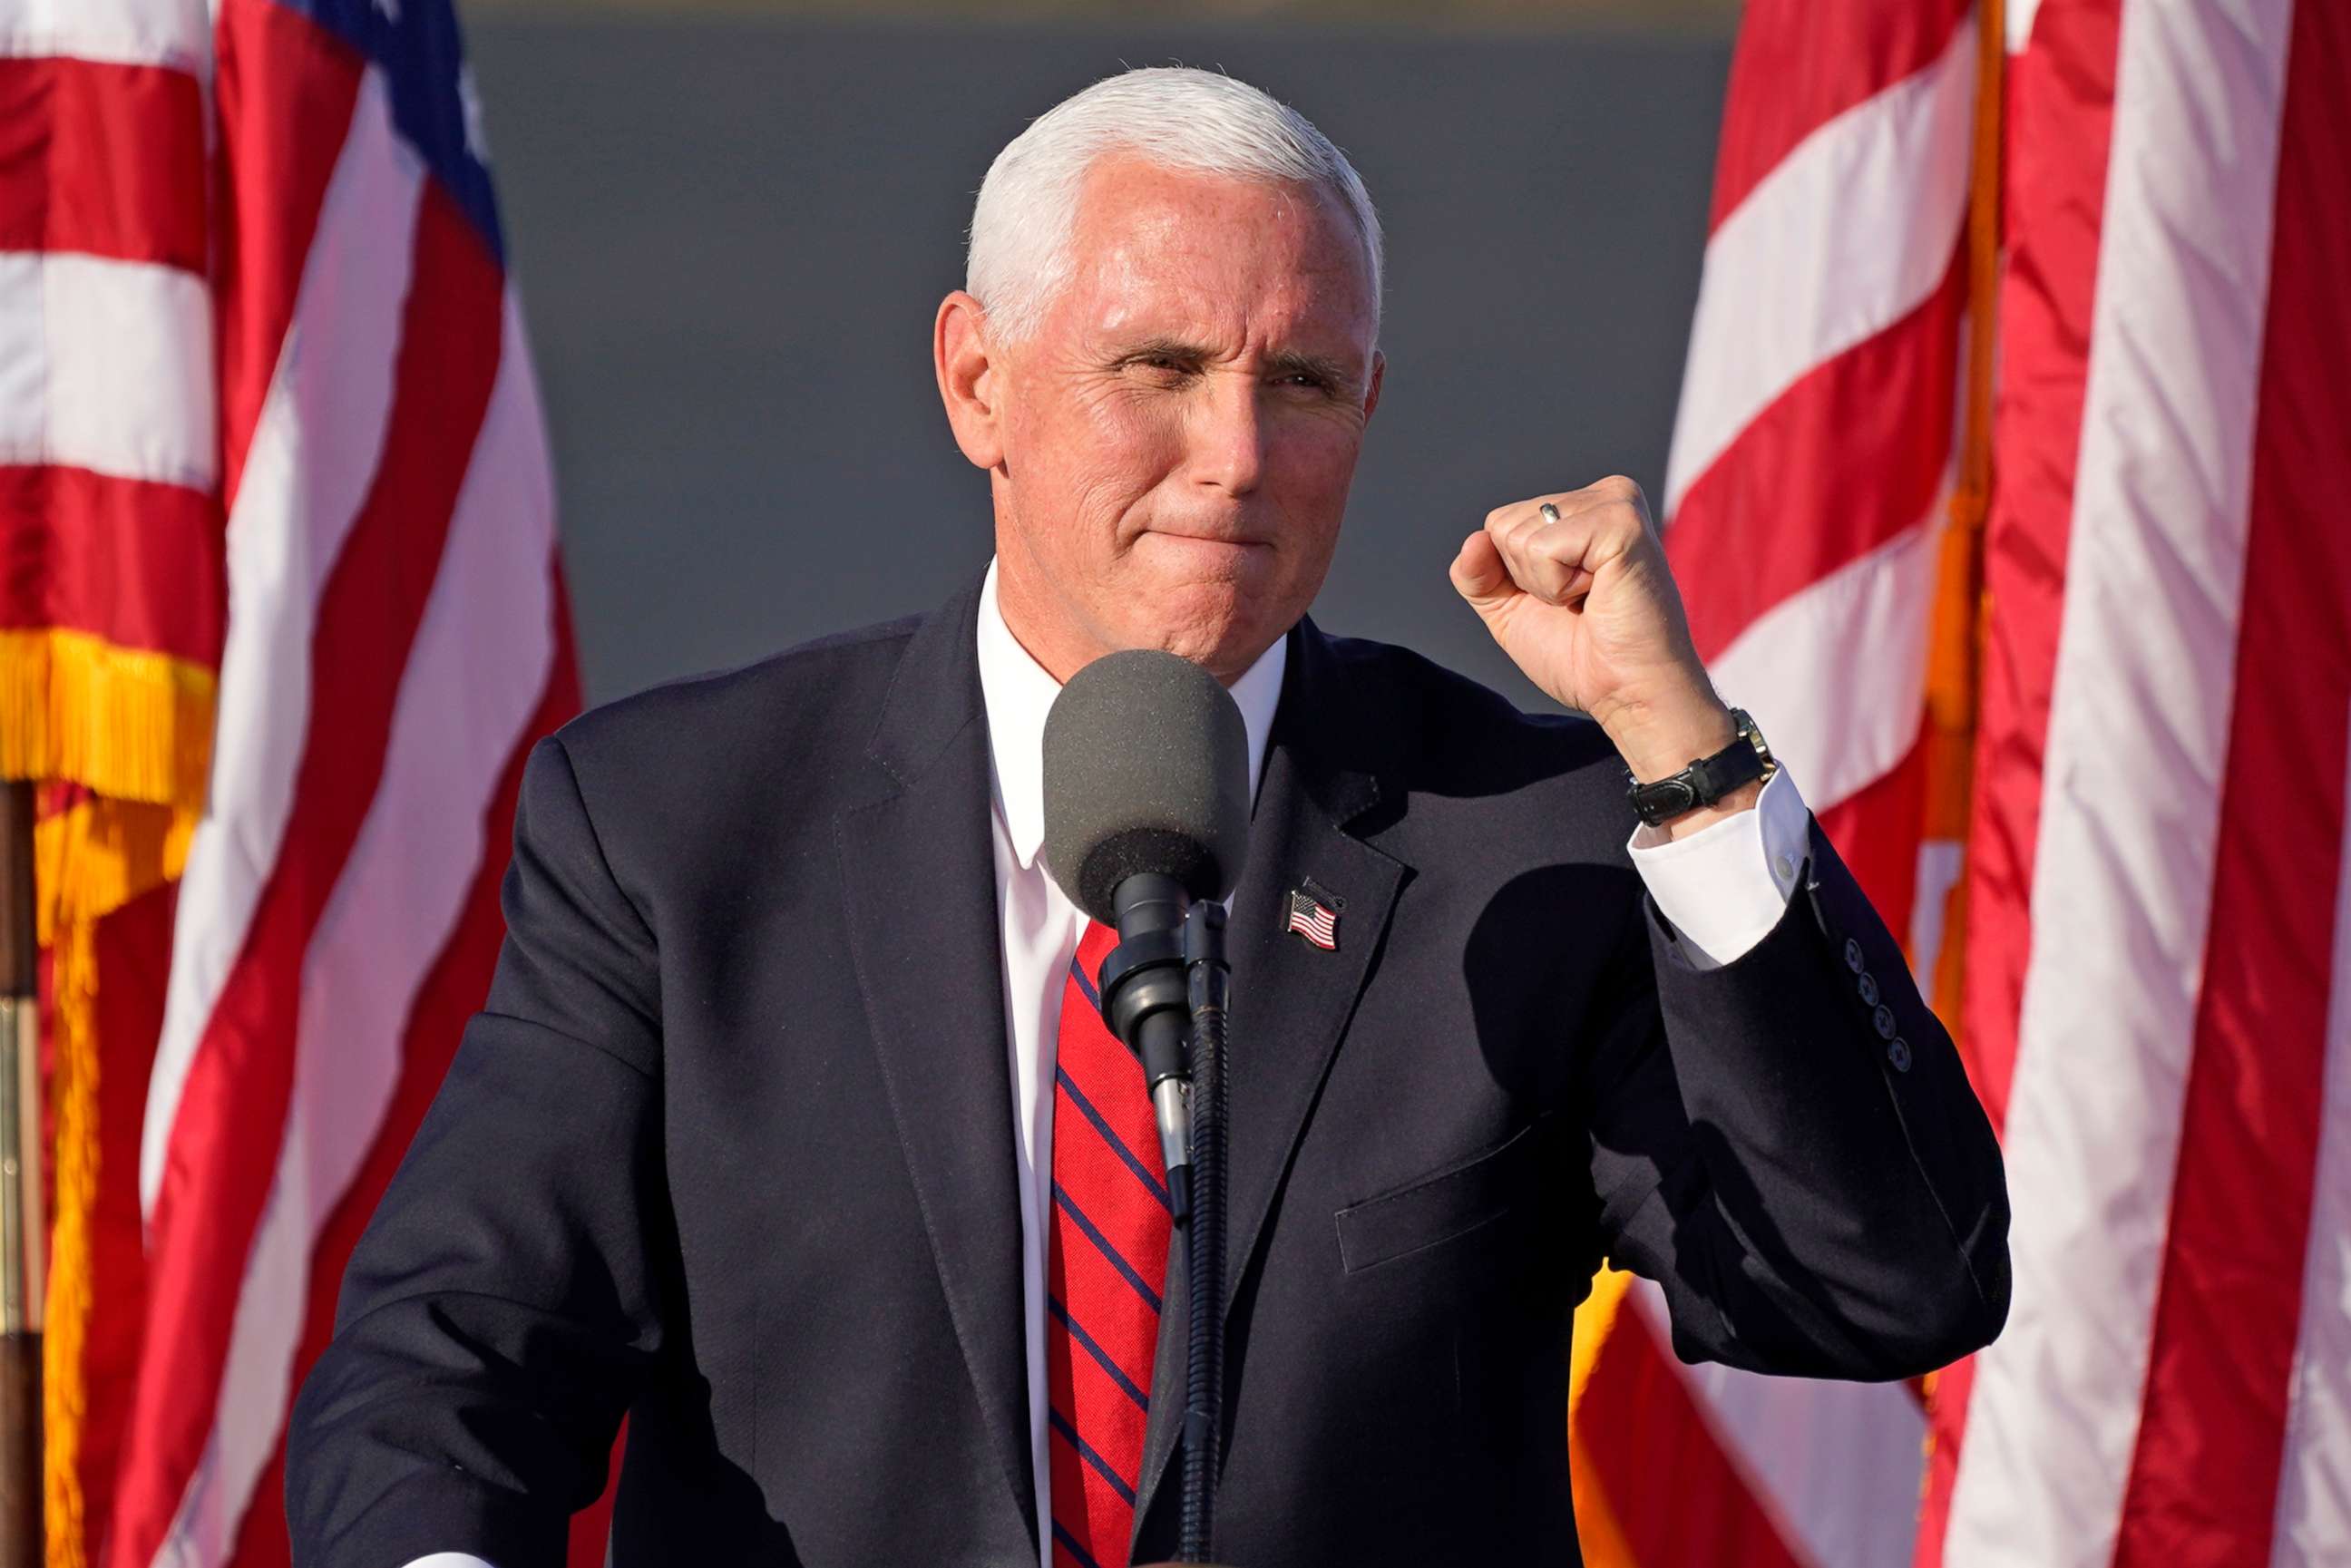 PHOTO: Vice President Mike Pence gestures as he speaks at a campaign rally at Allegheny County Airport in West Mifflin, Pa., Friday, Oct. 23, 2020.